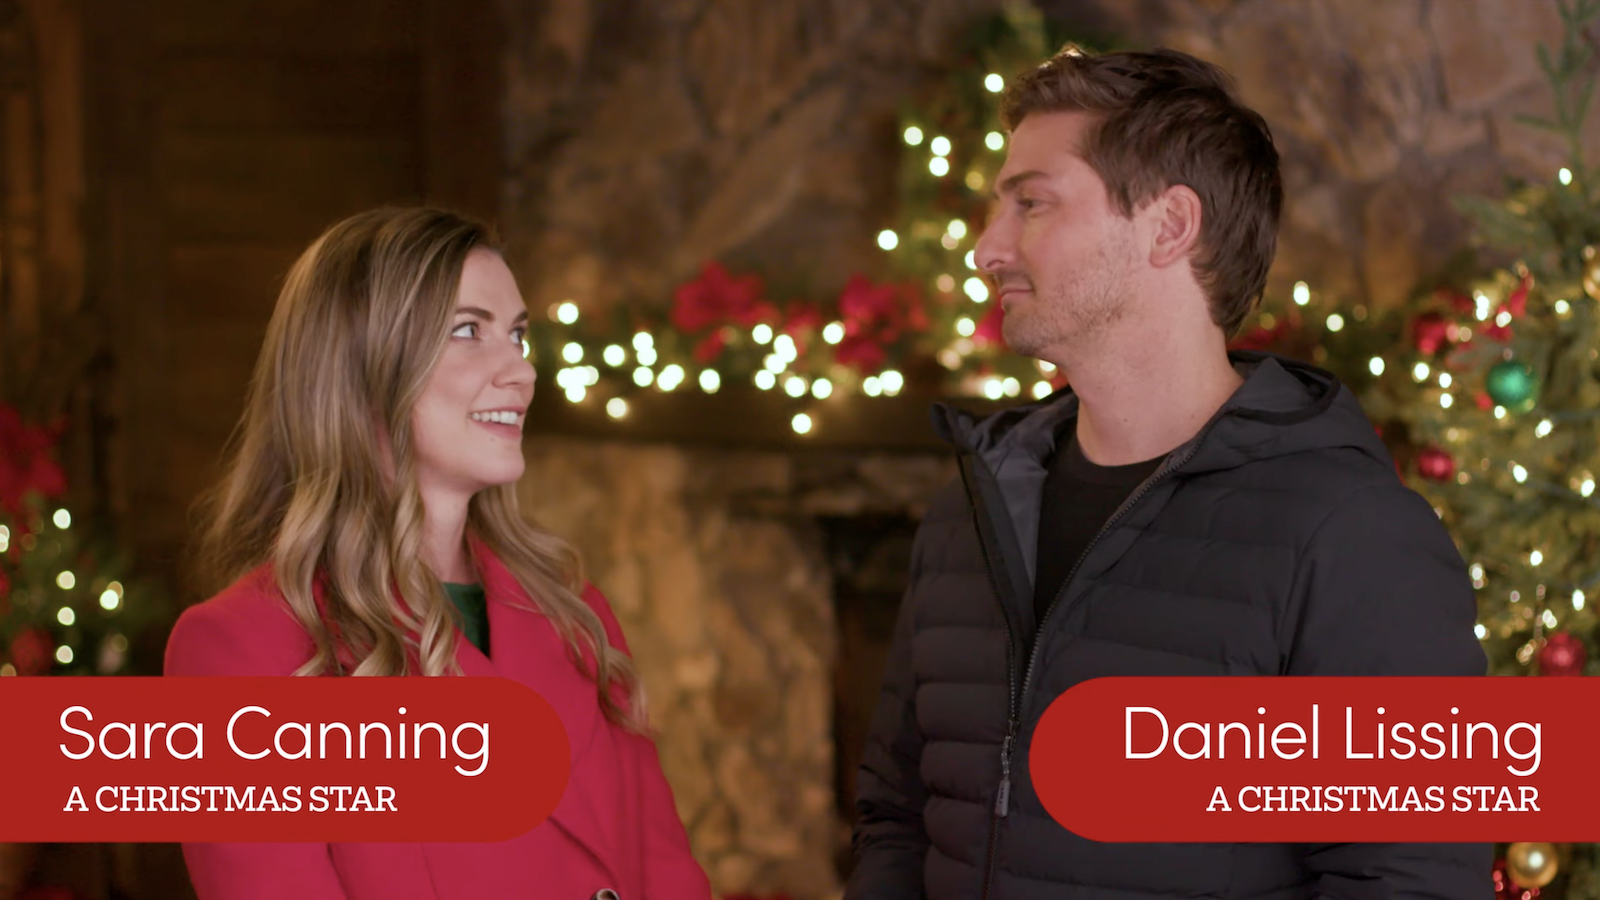 Sara Canning and Daniel Lissing promote A Christmas Star (2022) via Great American Family, YouTube